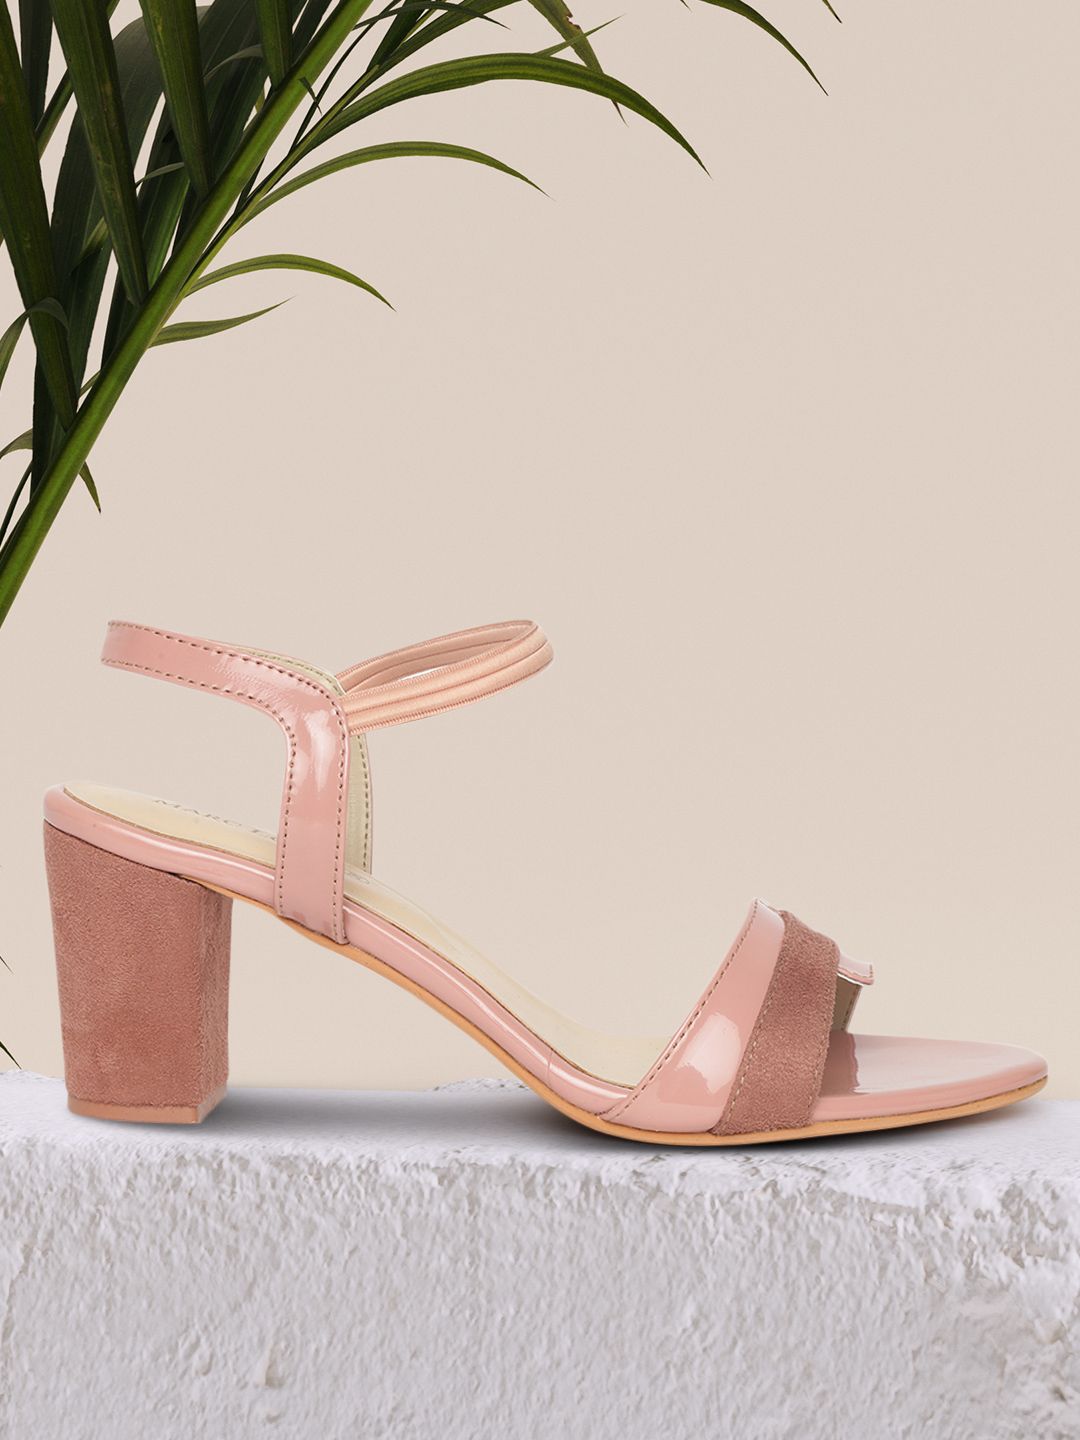 Marc Loire Nude-Coloured & Pink Block Sandals Price in India